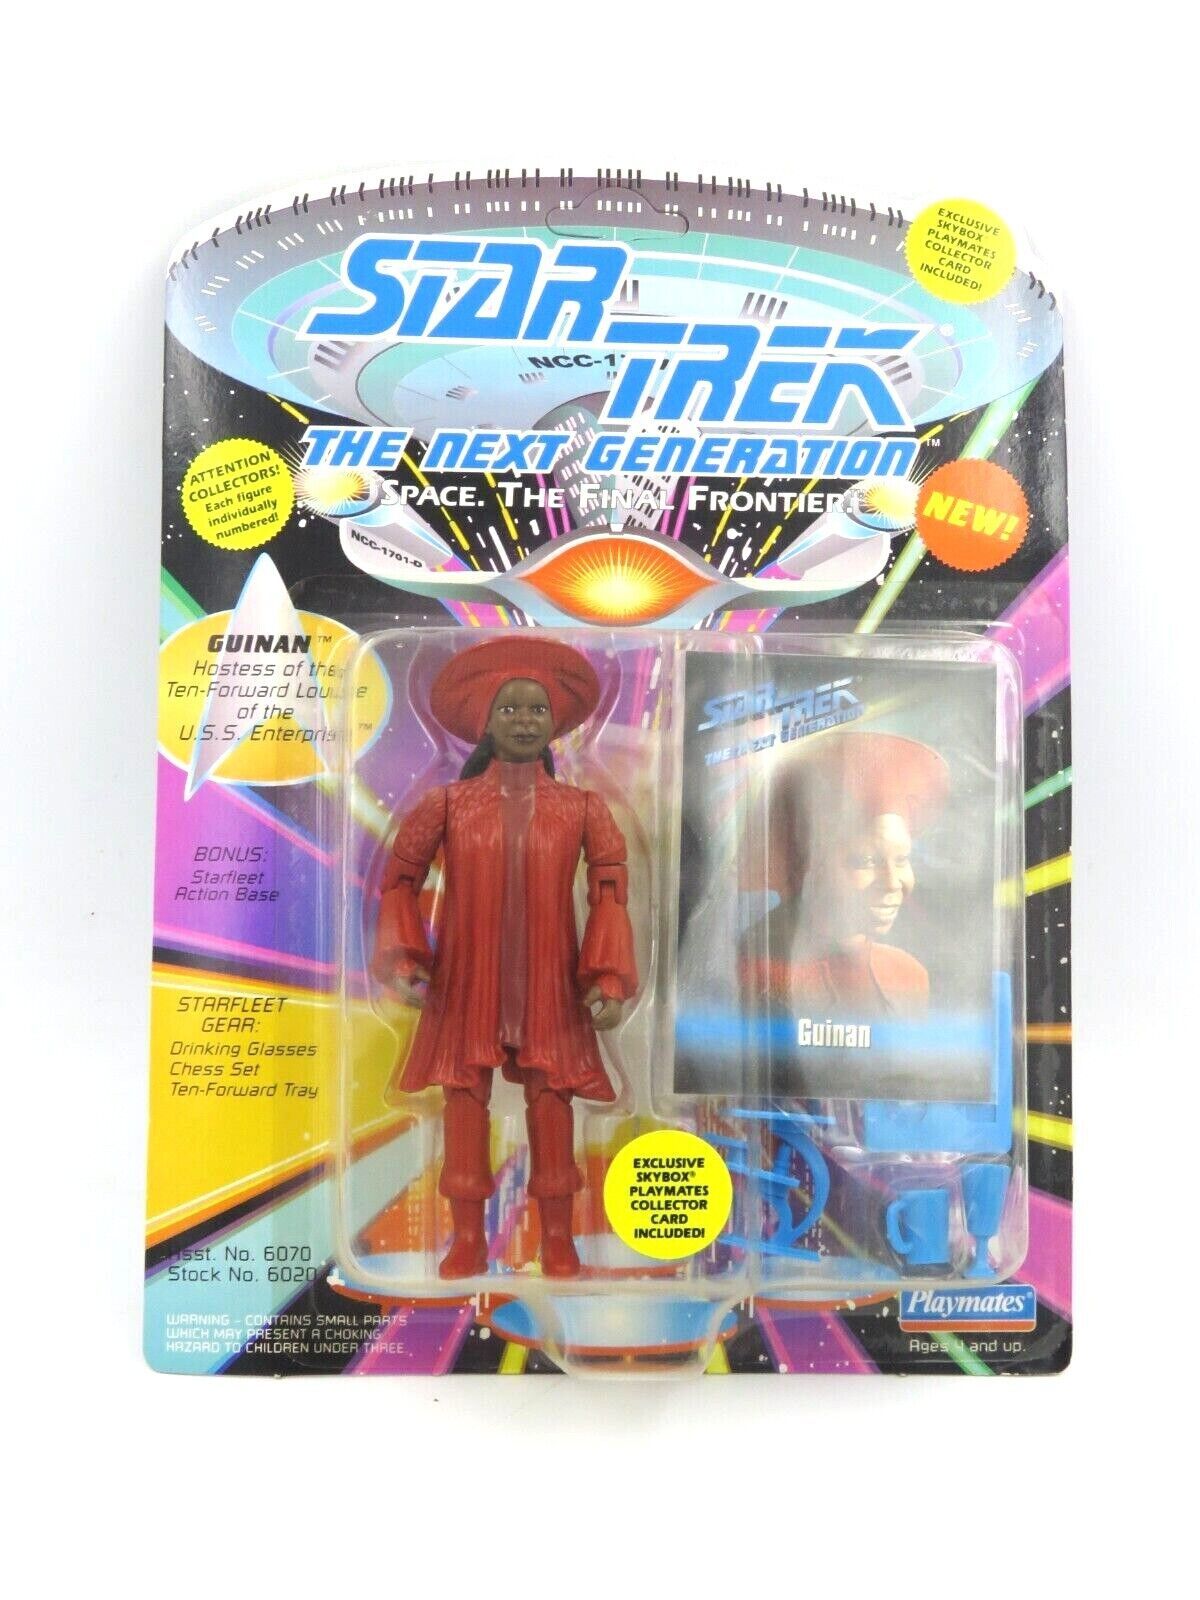 Star Trek The Next Generation TNG Playmates 1993 Guinan with Collector Card New